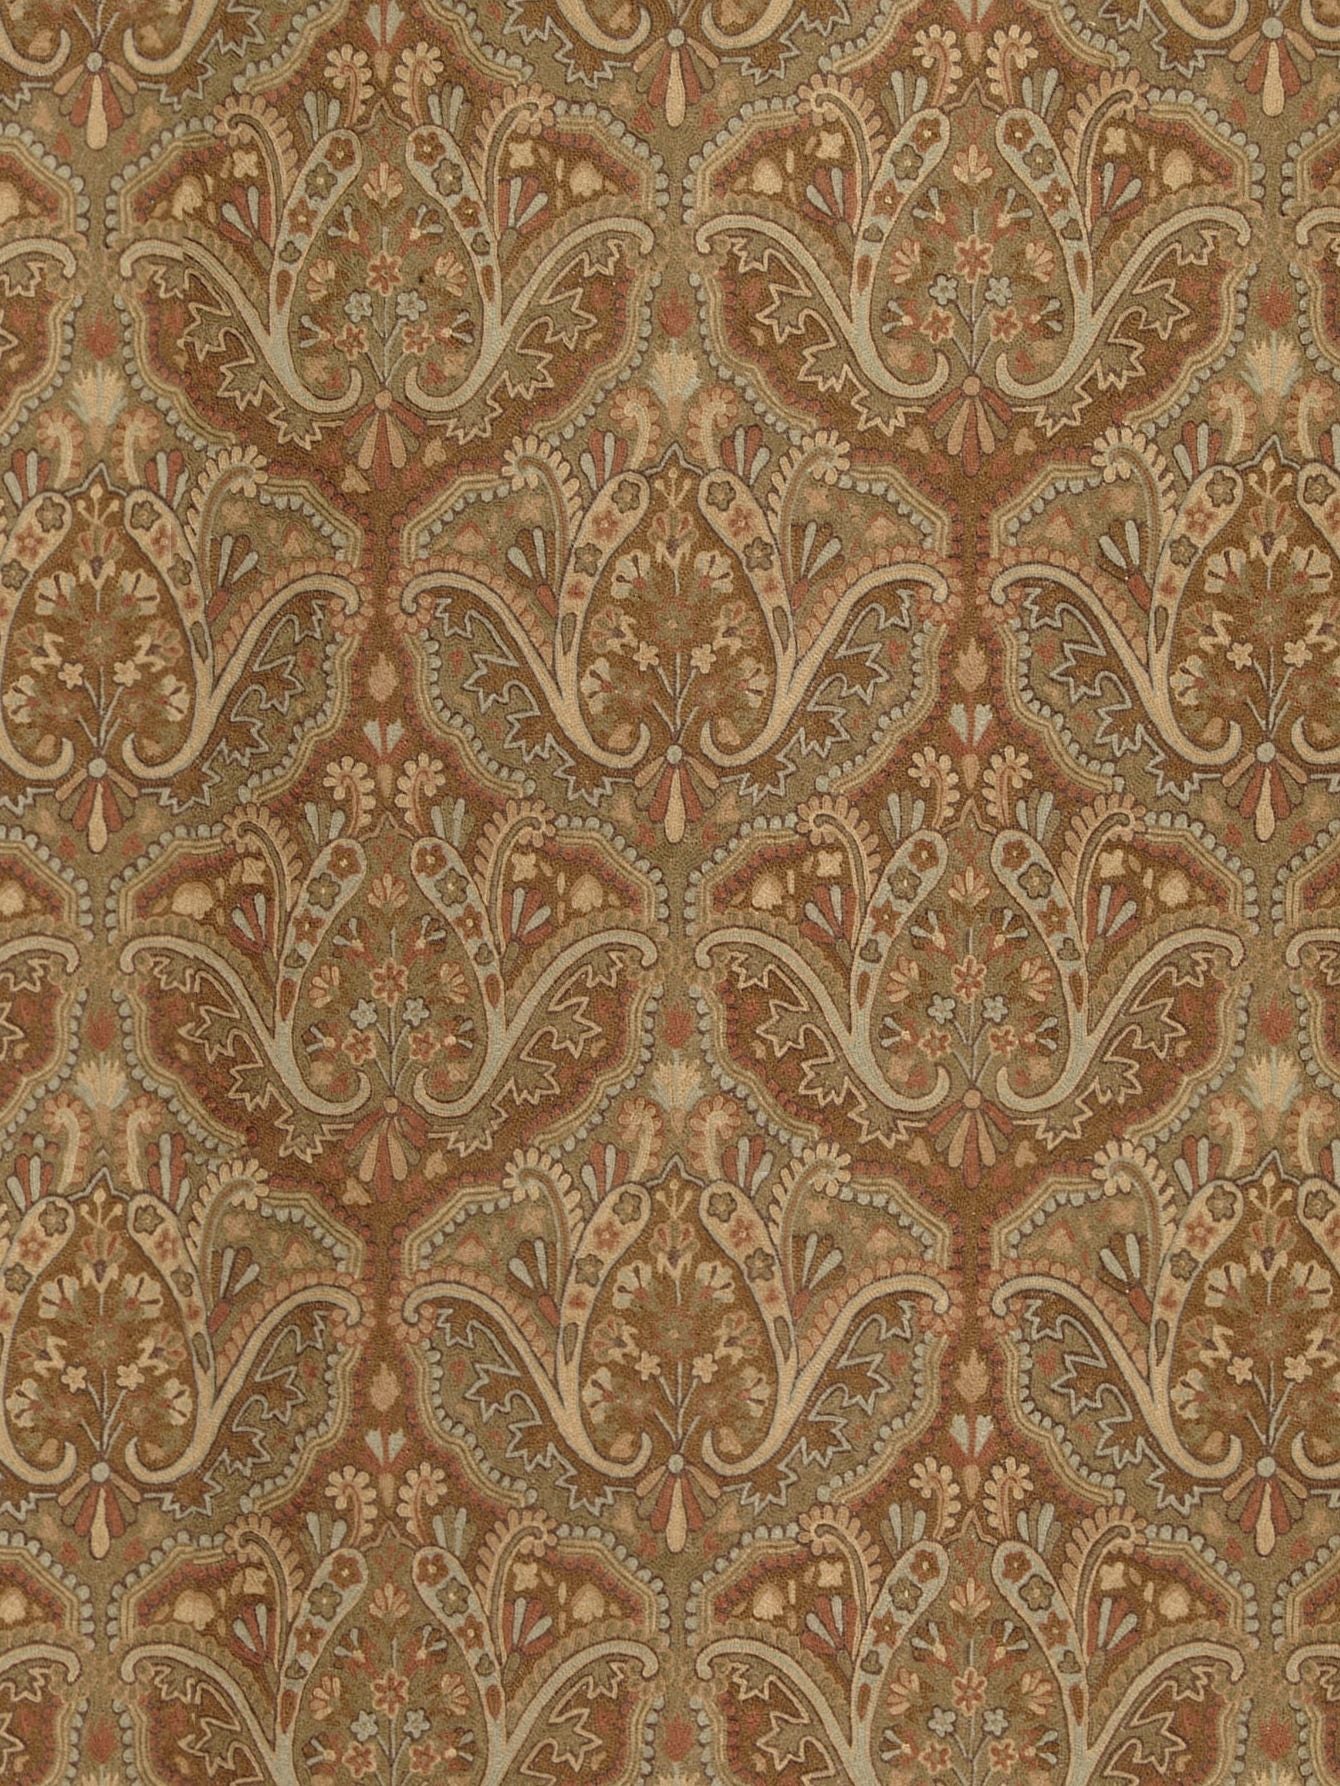 Shaldar Crewel fabric in brown color - pattern number WI 00012000 - by Scalamandre in the Old World Weavers collection